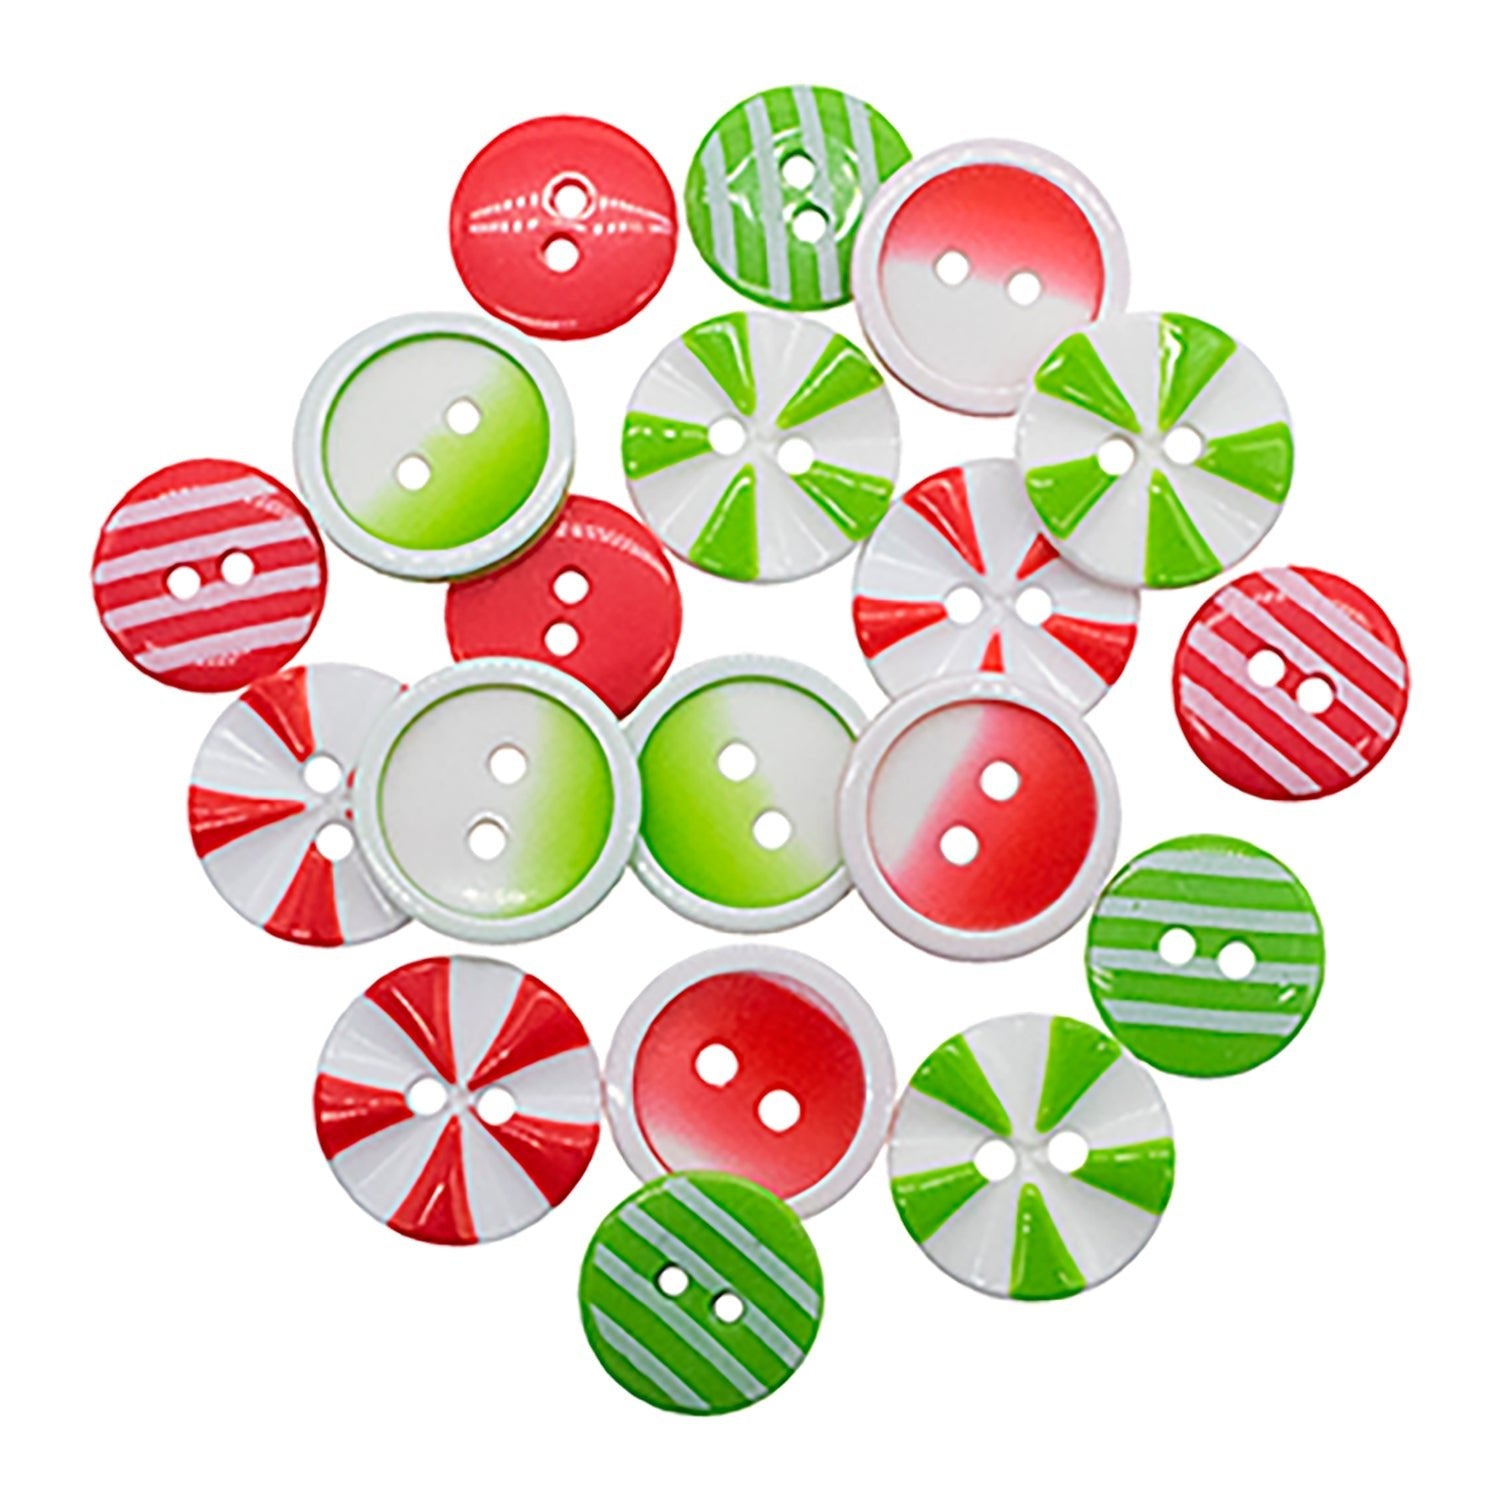 Buttons Galore and More Christmas Collection of Decorative Novelty Buttons Embellishments for Craft and Sewing DIY Holiday Projects (Santa's Sparkle)